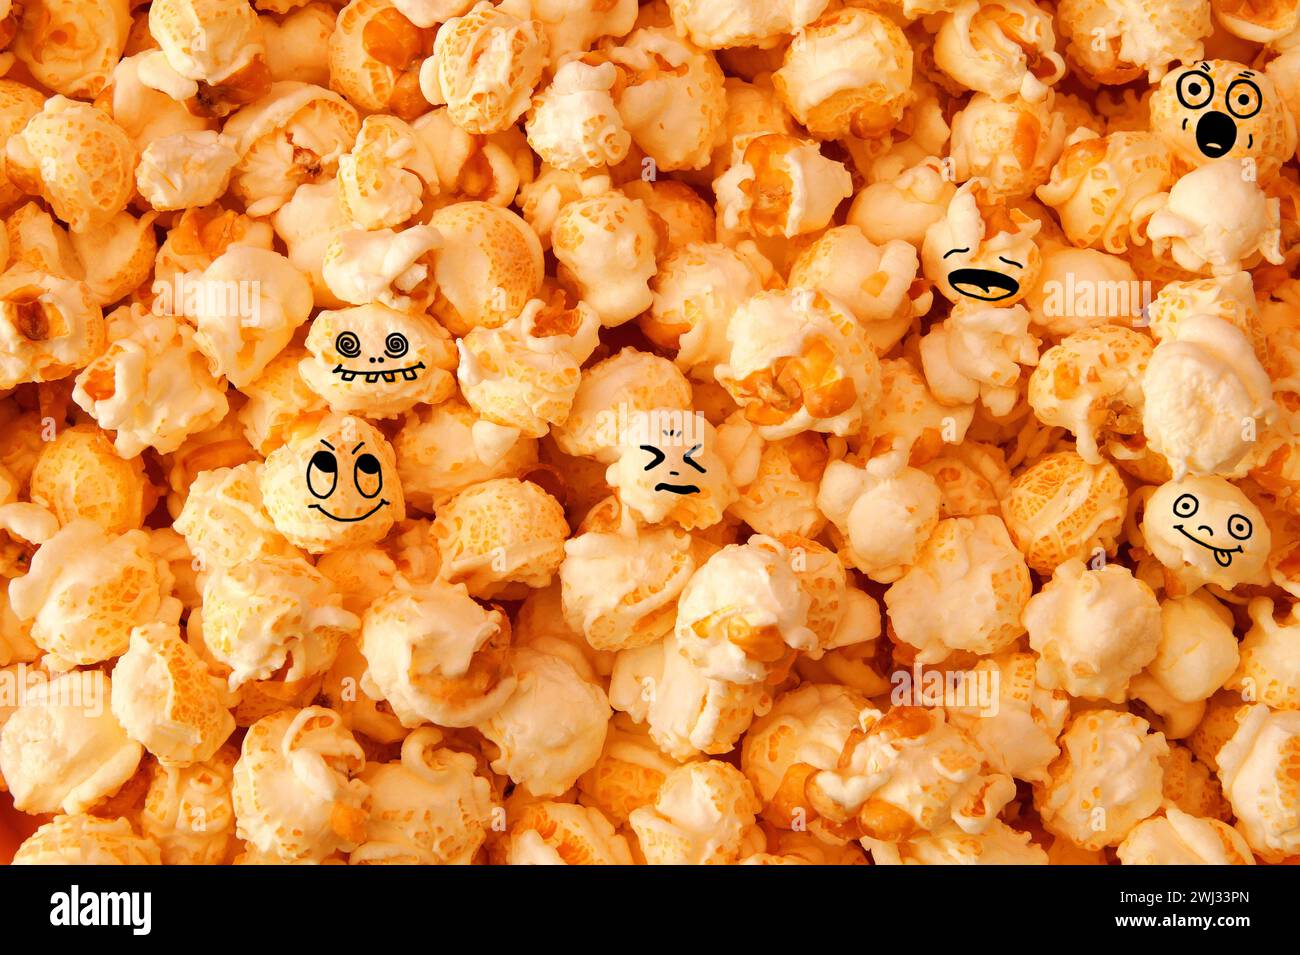 Hoax symbol. funny smiling popcorn background. detailed close-up of Scattered caramel popcorn, textu Stock Photo